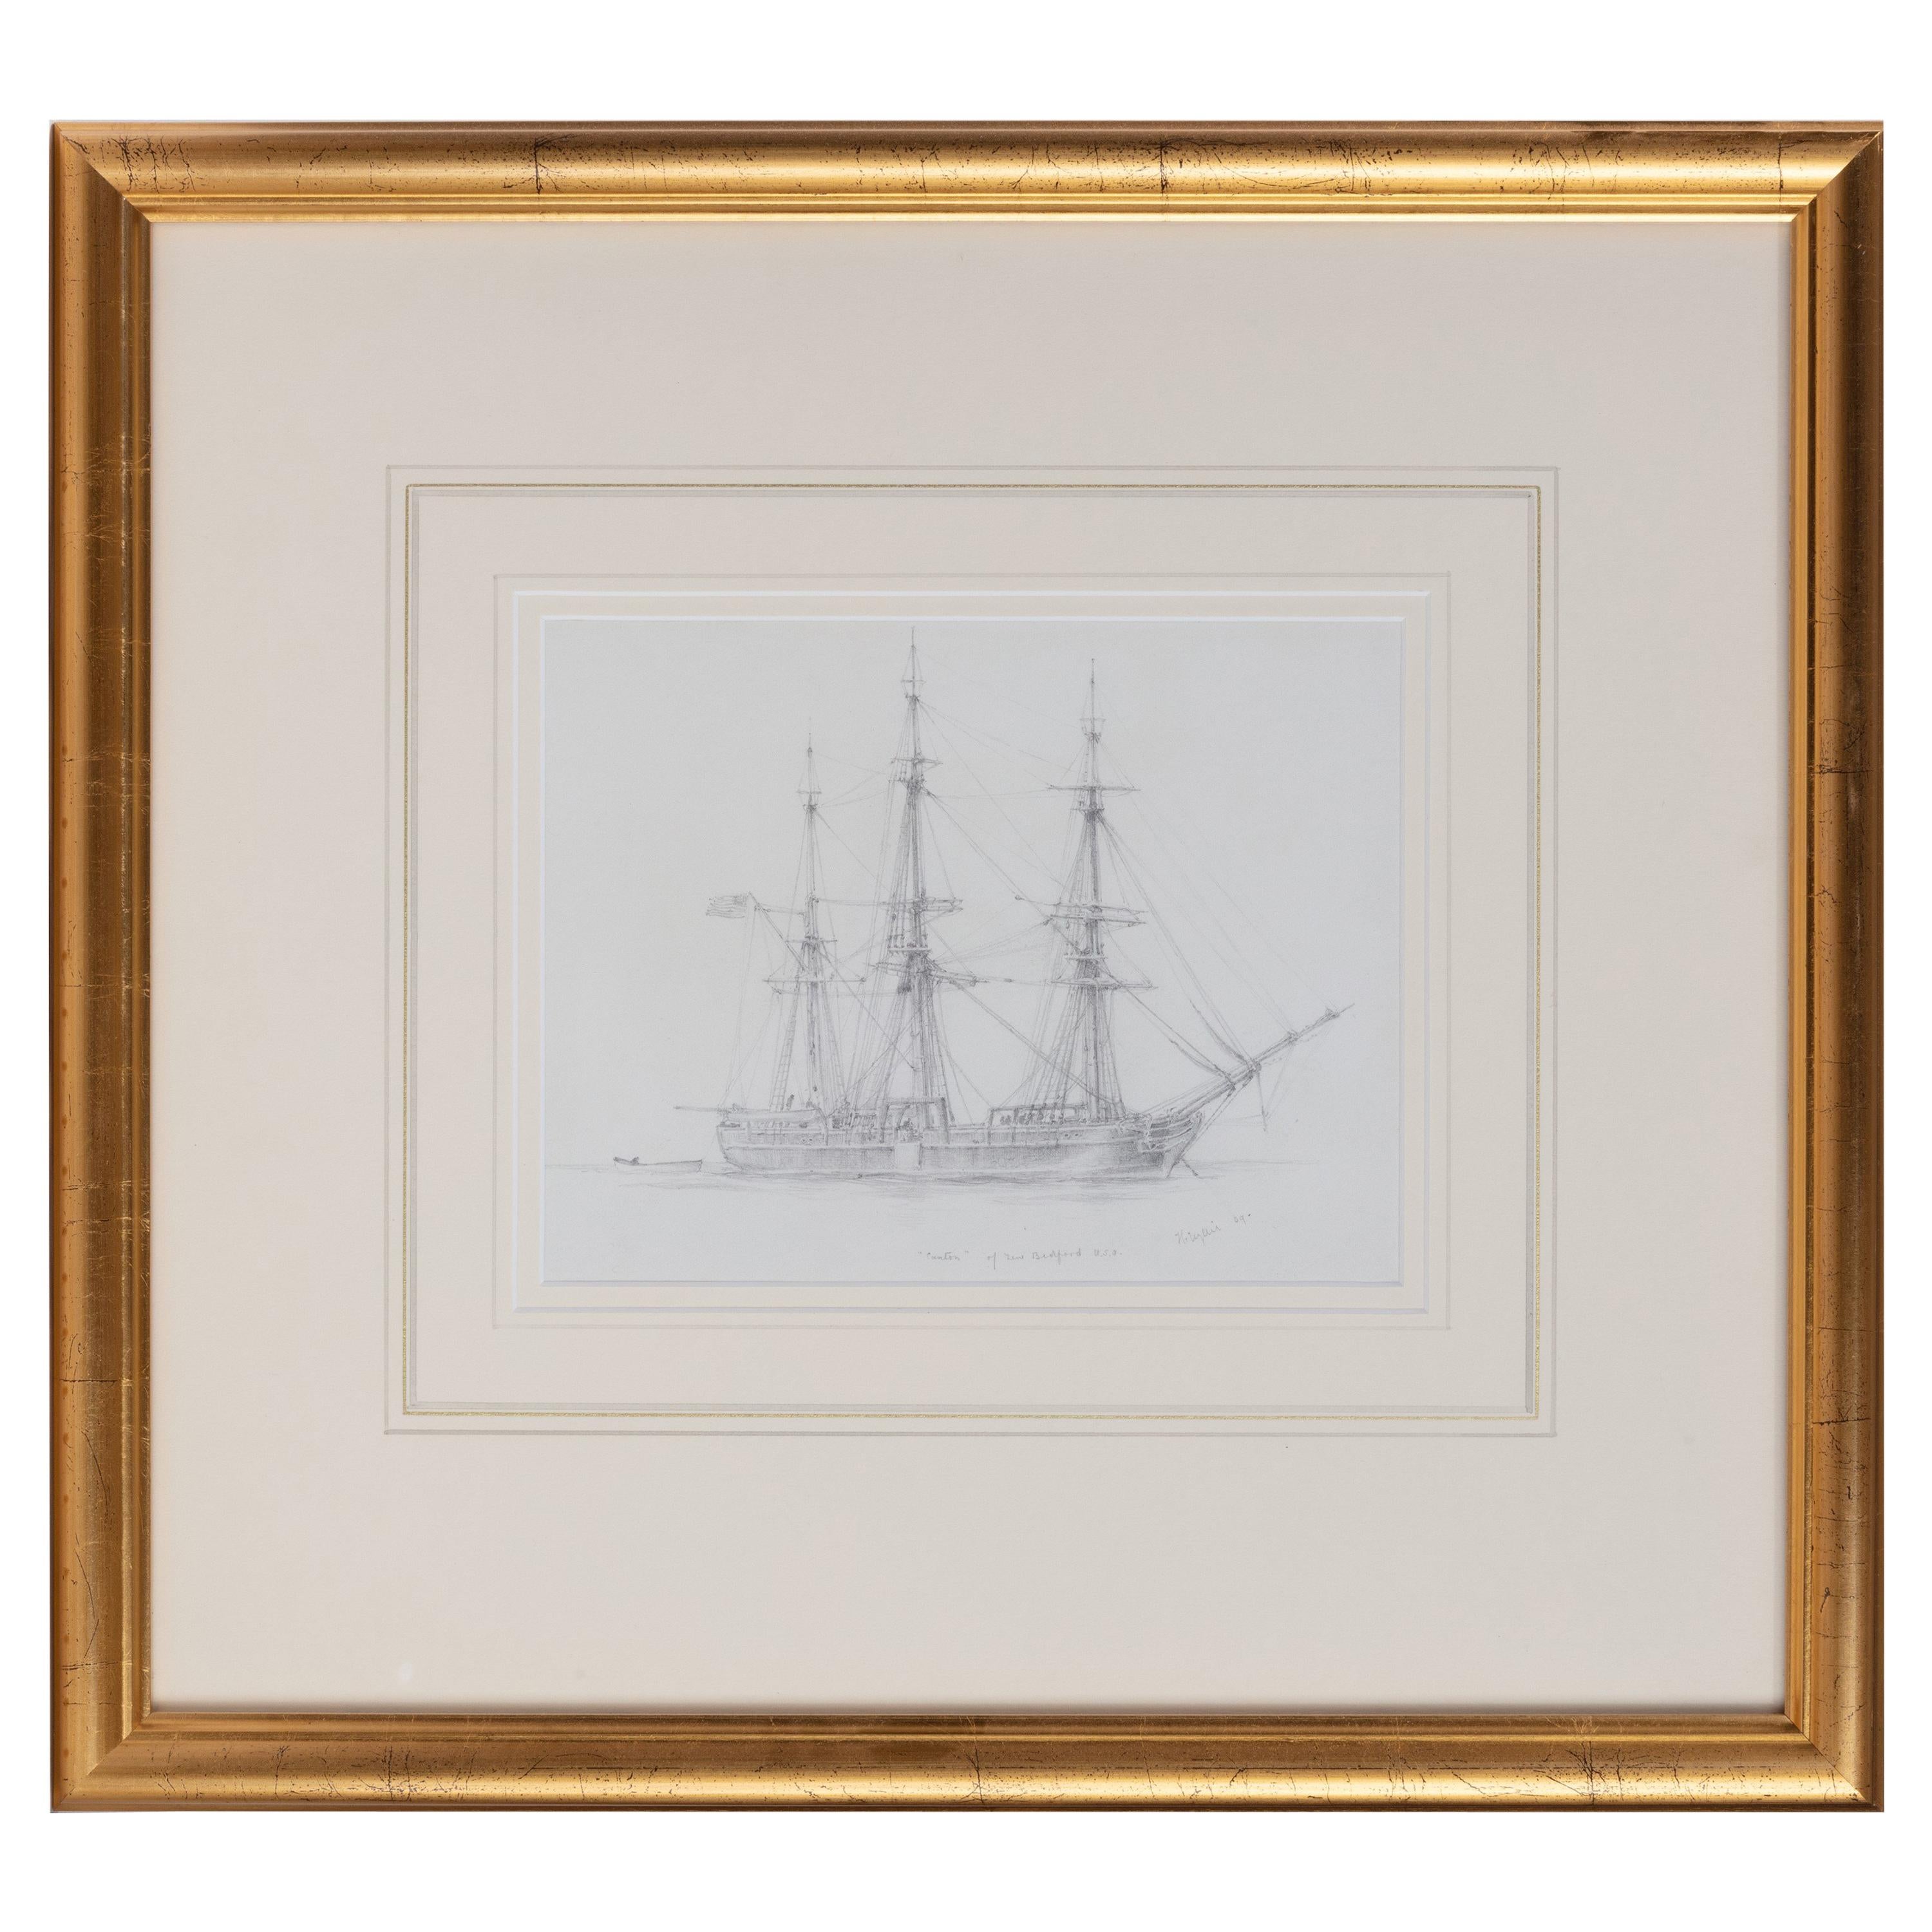 An Unusual Pencil Drawing of “Canton”, a Three-Masted Whaling Ship-at This Point For Sale